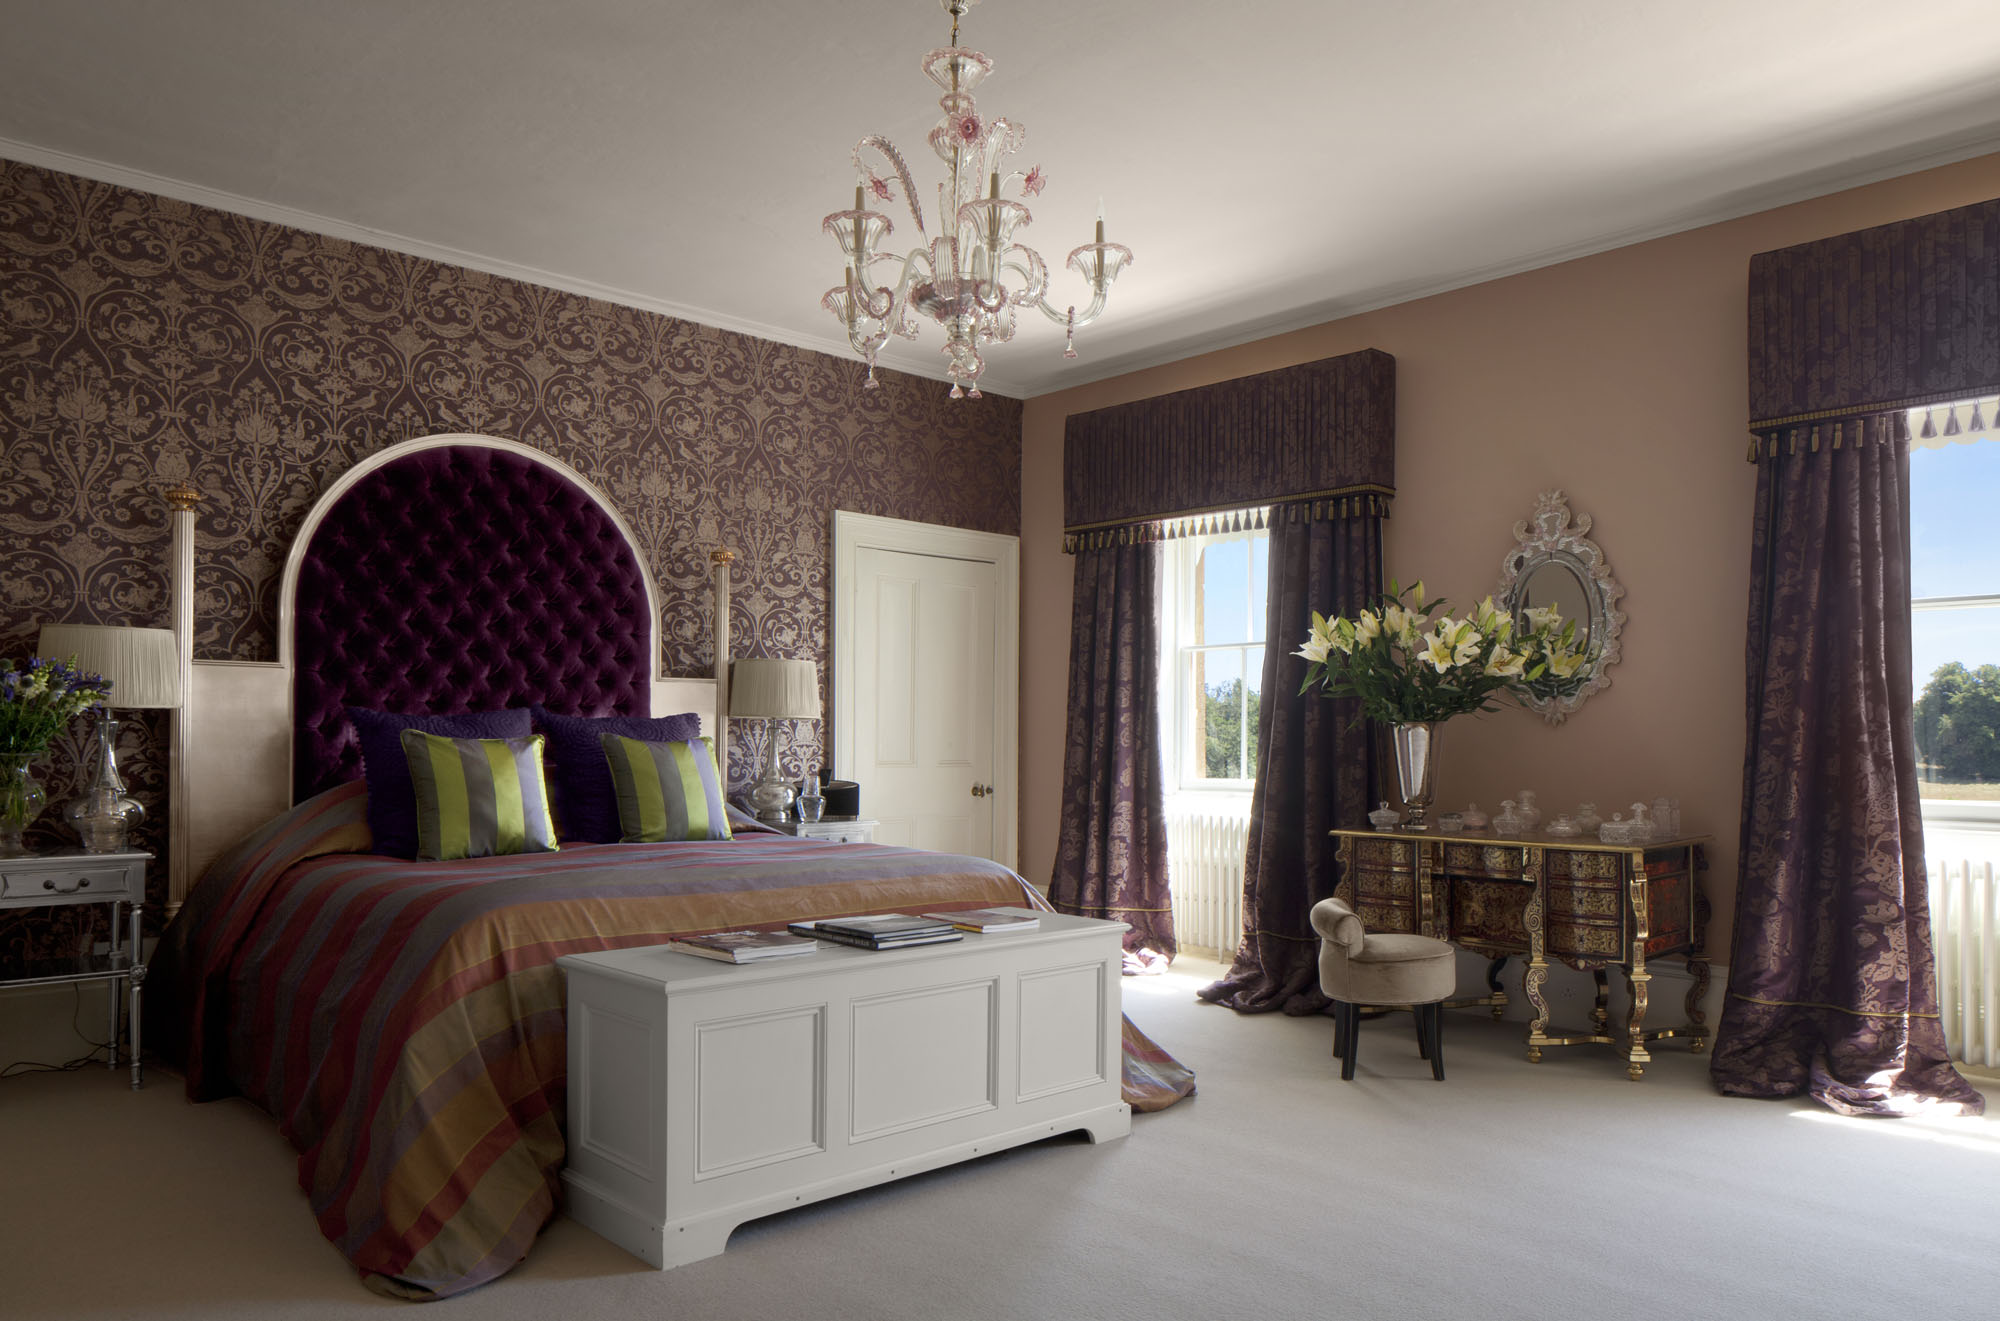 stately bedroom furniture with large columns